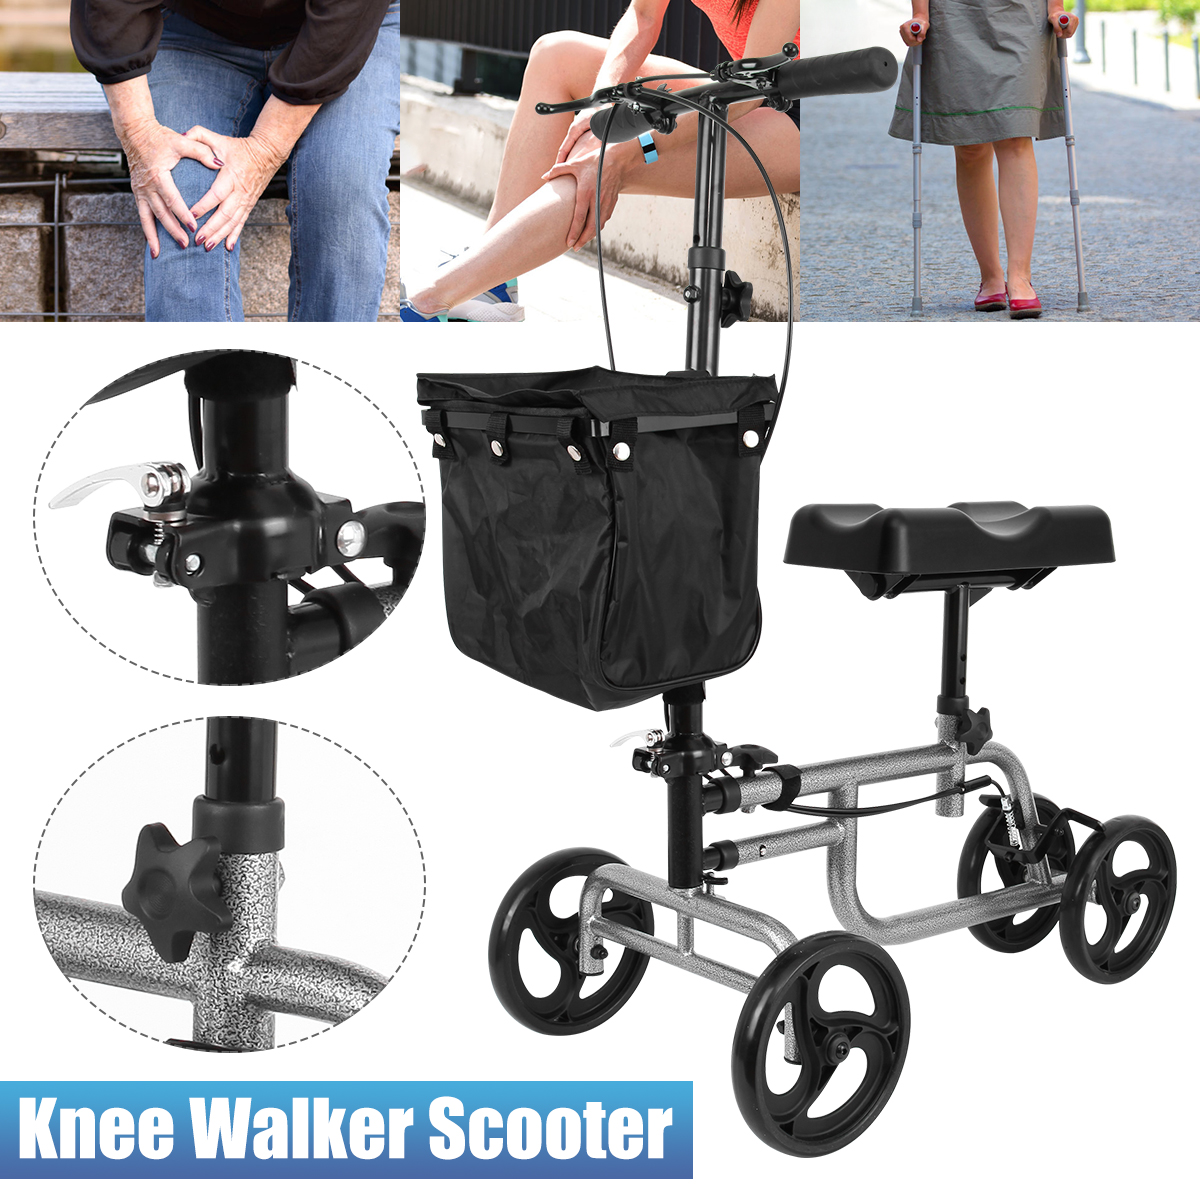 Knee-Walker-Scooter-Foldable-Adjusted-Height-Walking-Aid-Knee-Support-and-Basket-1940439-2